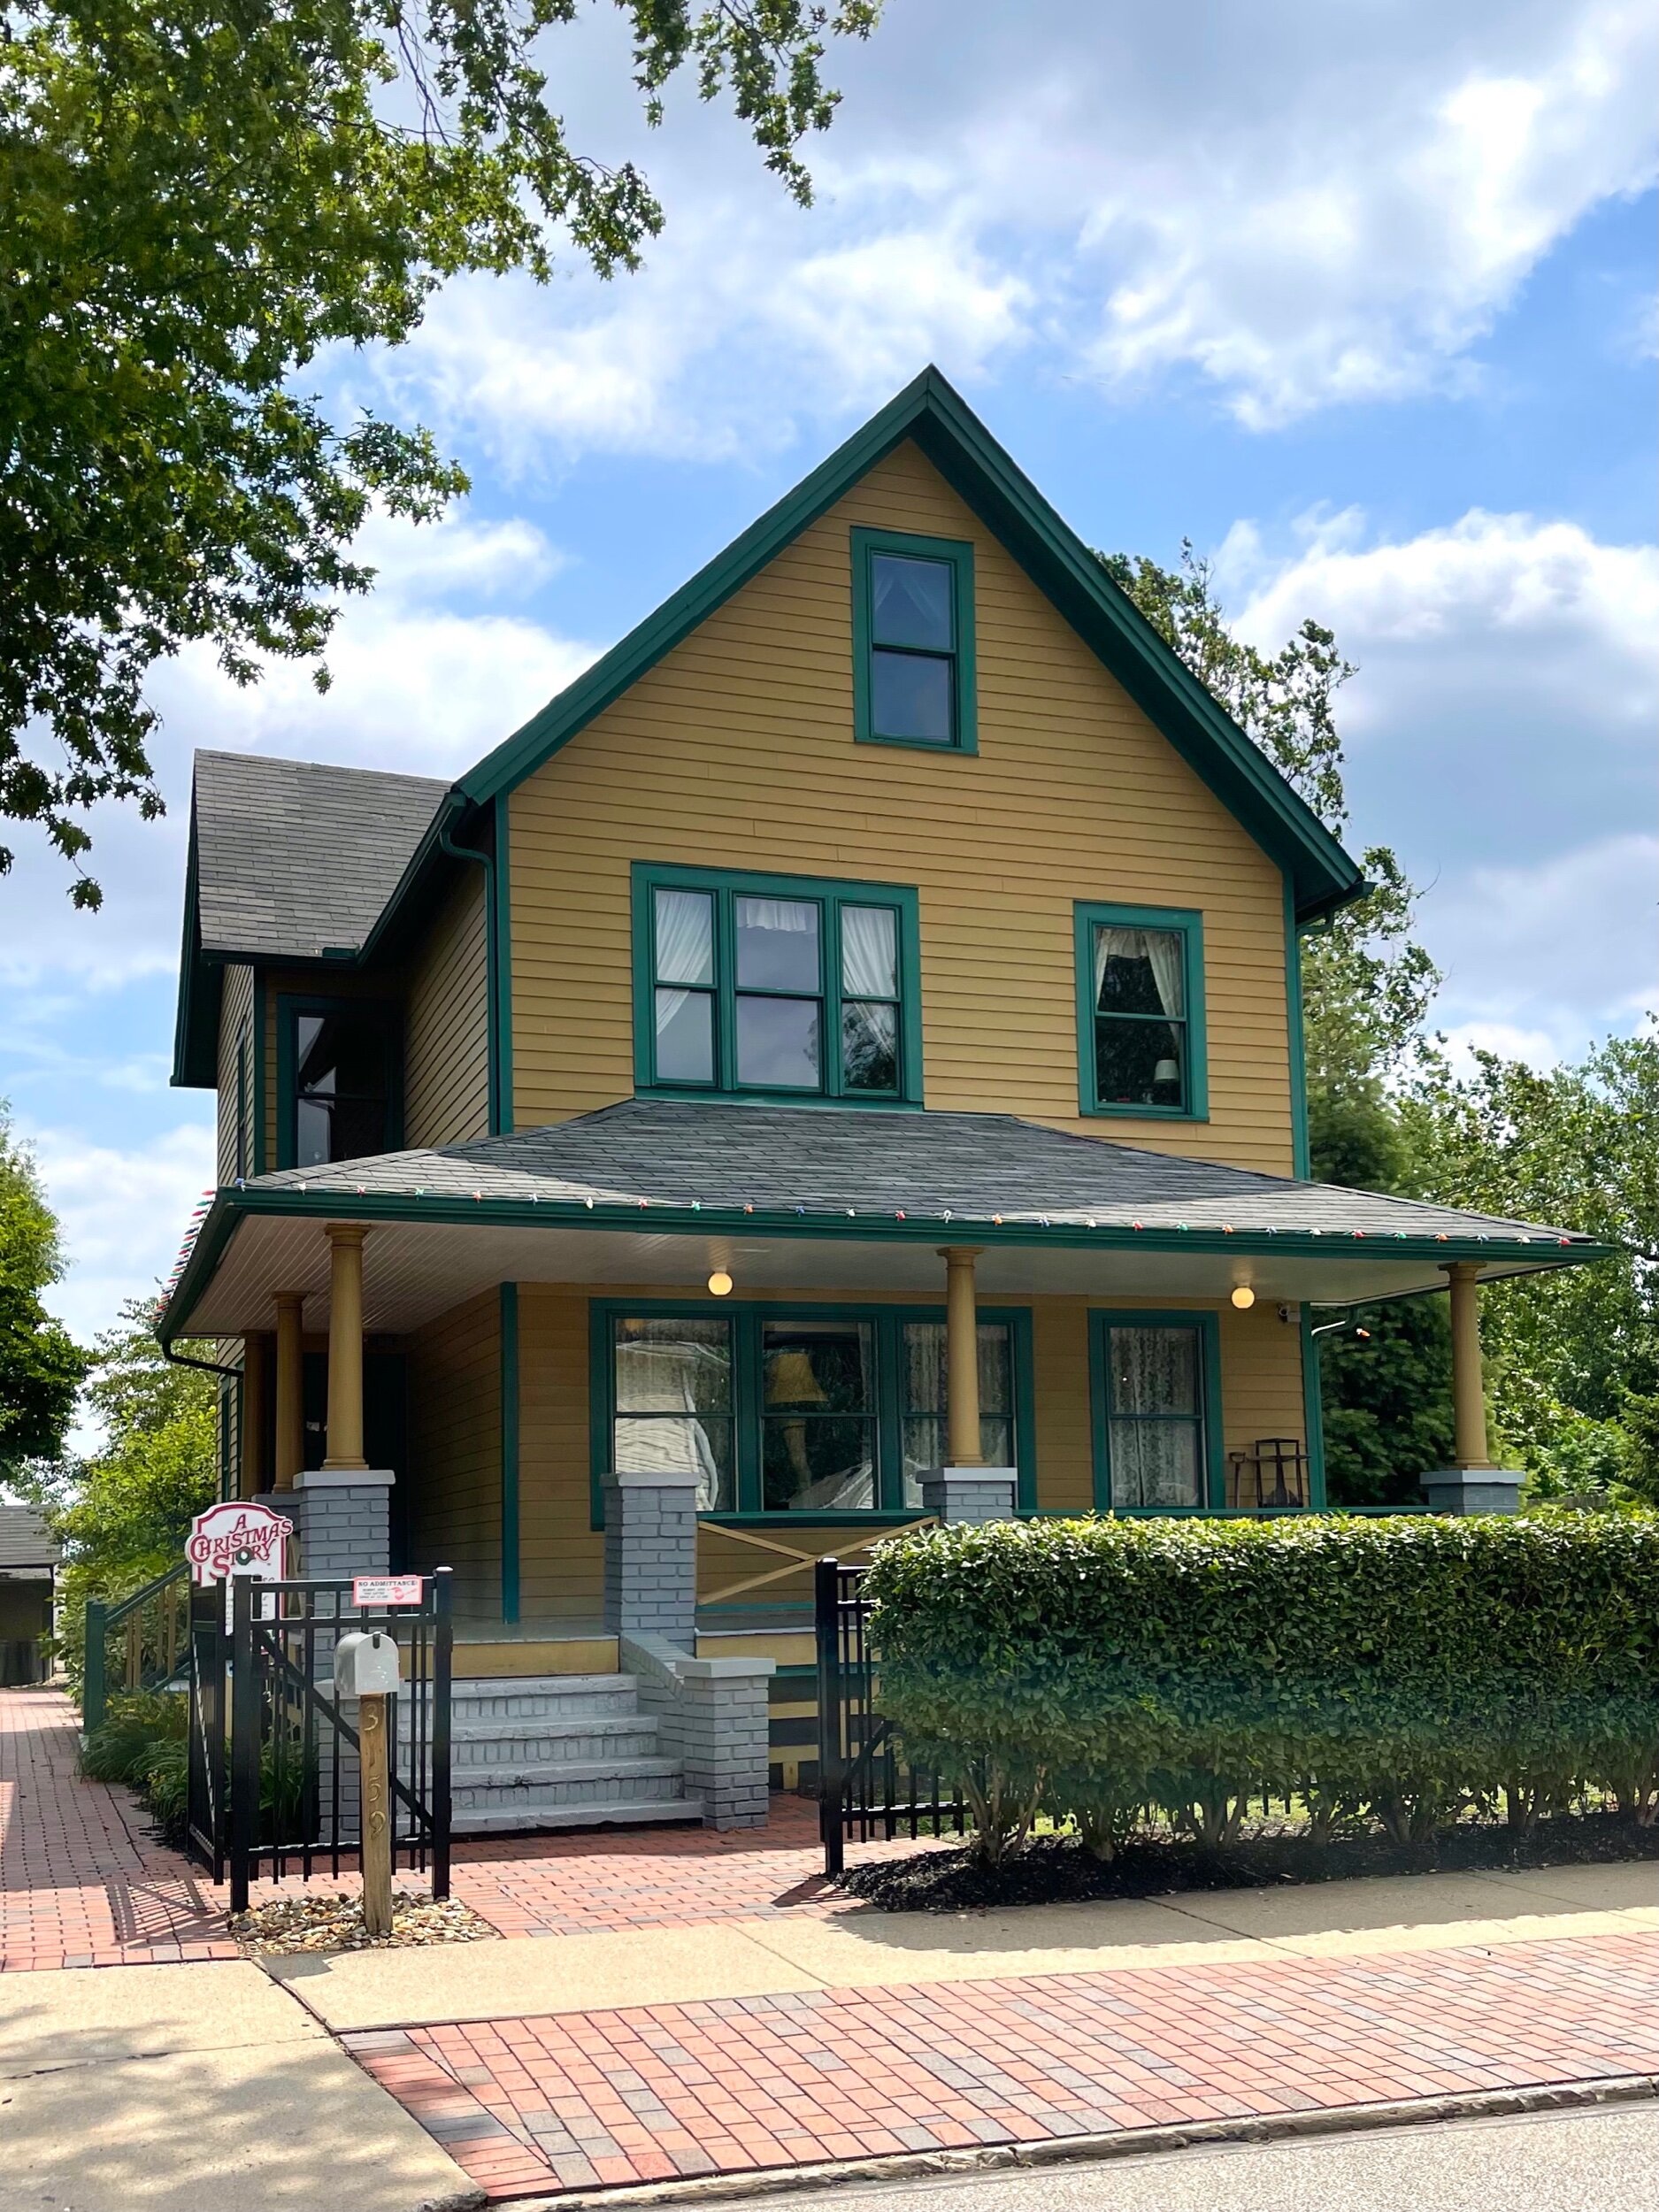  If   A Christmas Story   is one of your favorite movies, you may recognize this Cleveland, Ohio house. Filmmakers fell in love with the outside of this house and decided this was the perfect setting for  A Christmas Story.  Unfortunately, the creato